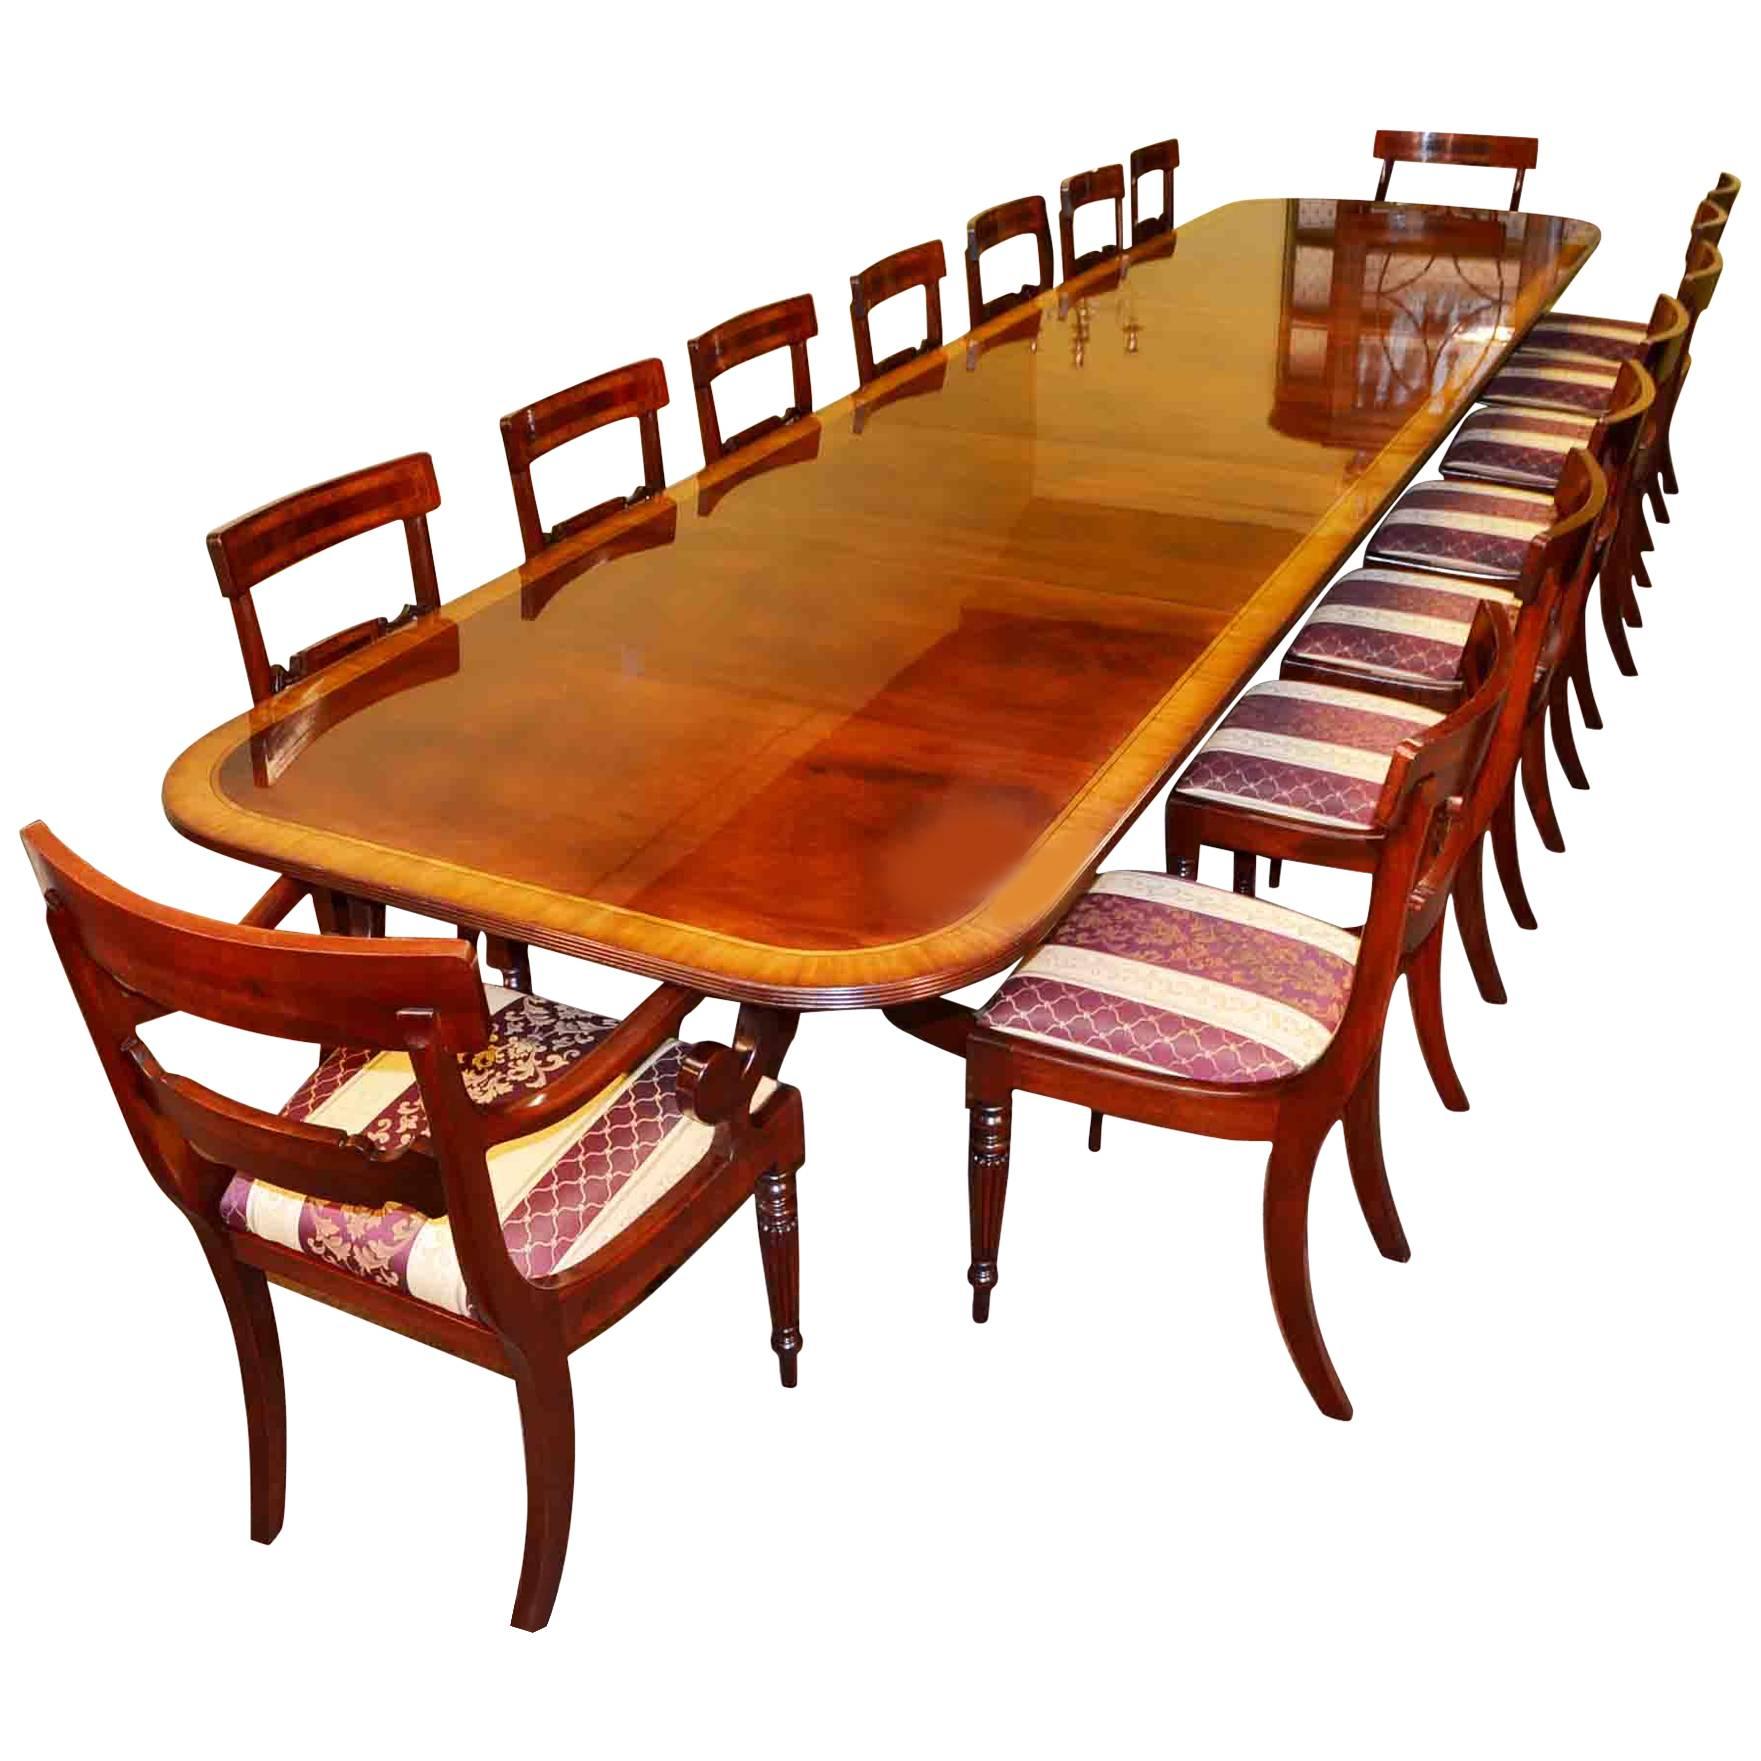 Regency Dining Table and 16 Chairs Flame Mahogany